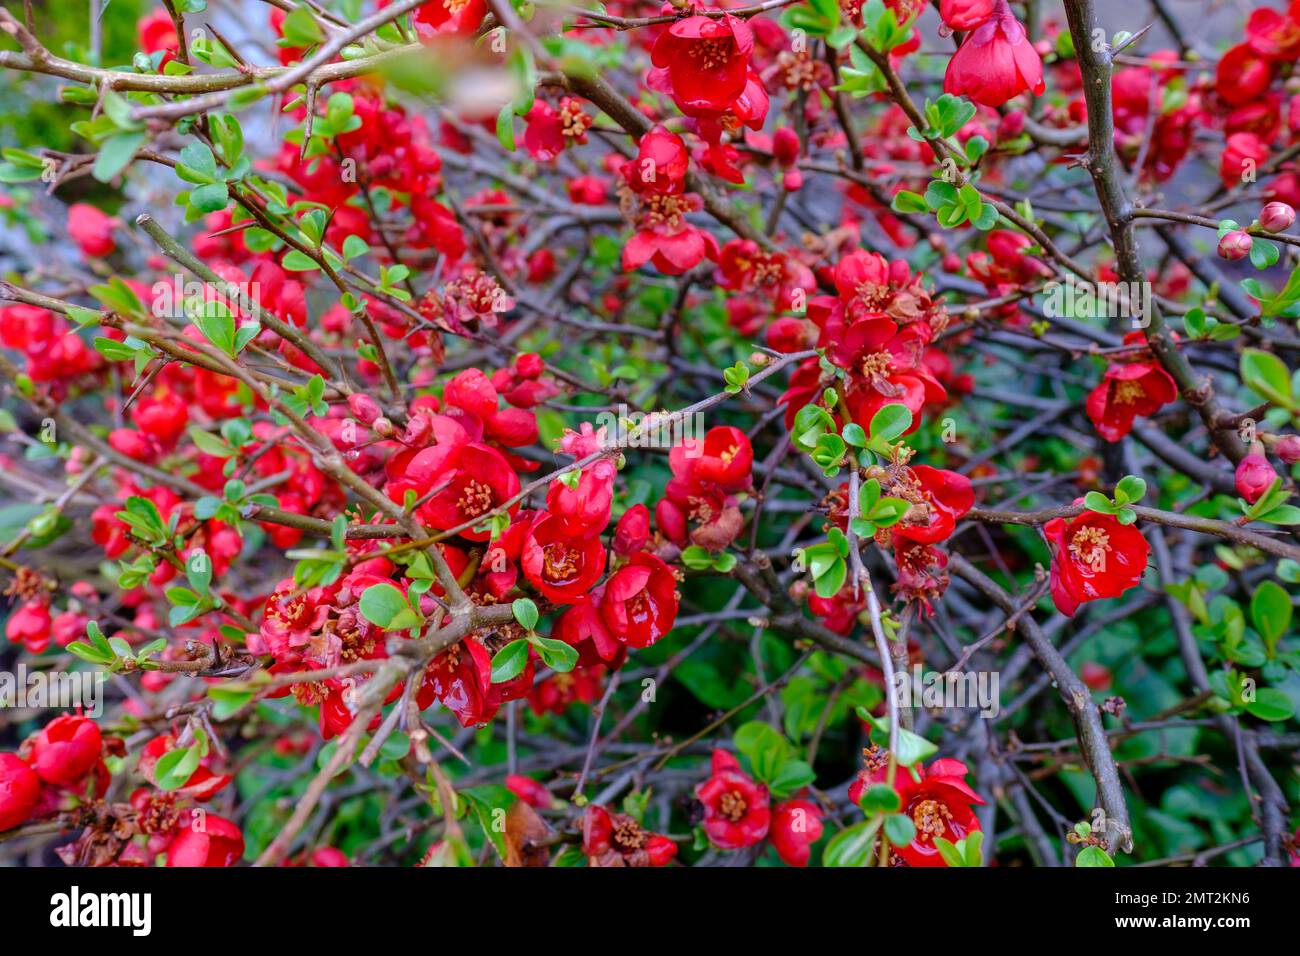 Detail of shrub of Red Flowering Quince flowers, with vibrant coral-red blooms. Stock Photo